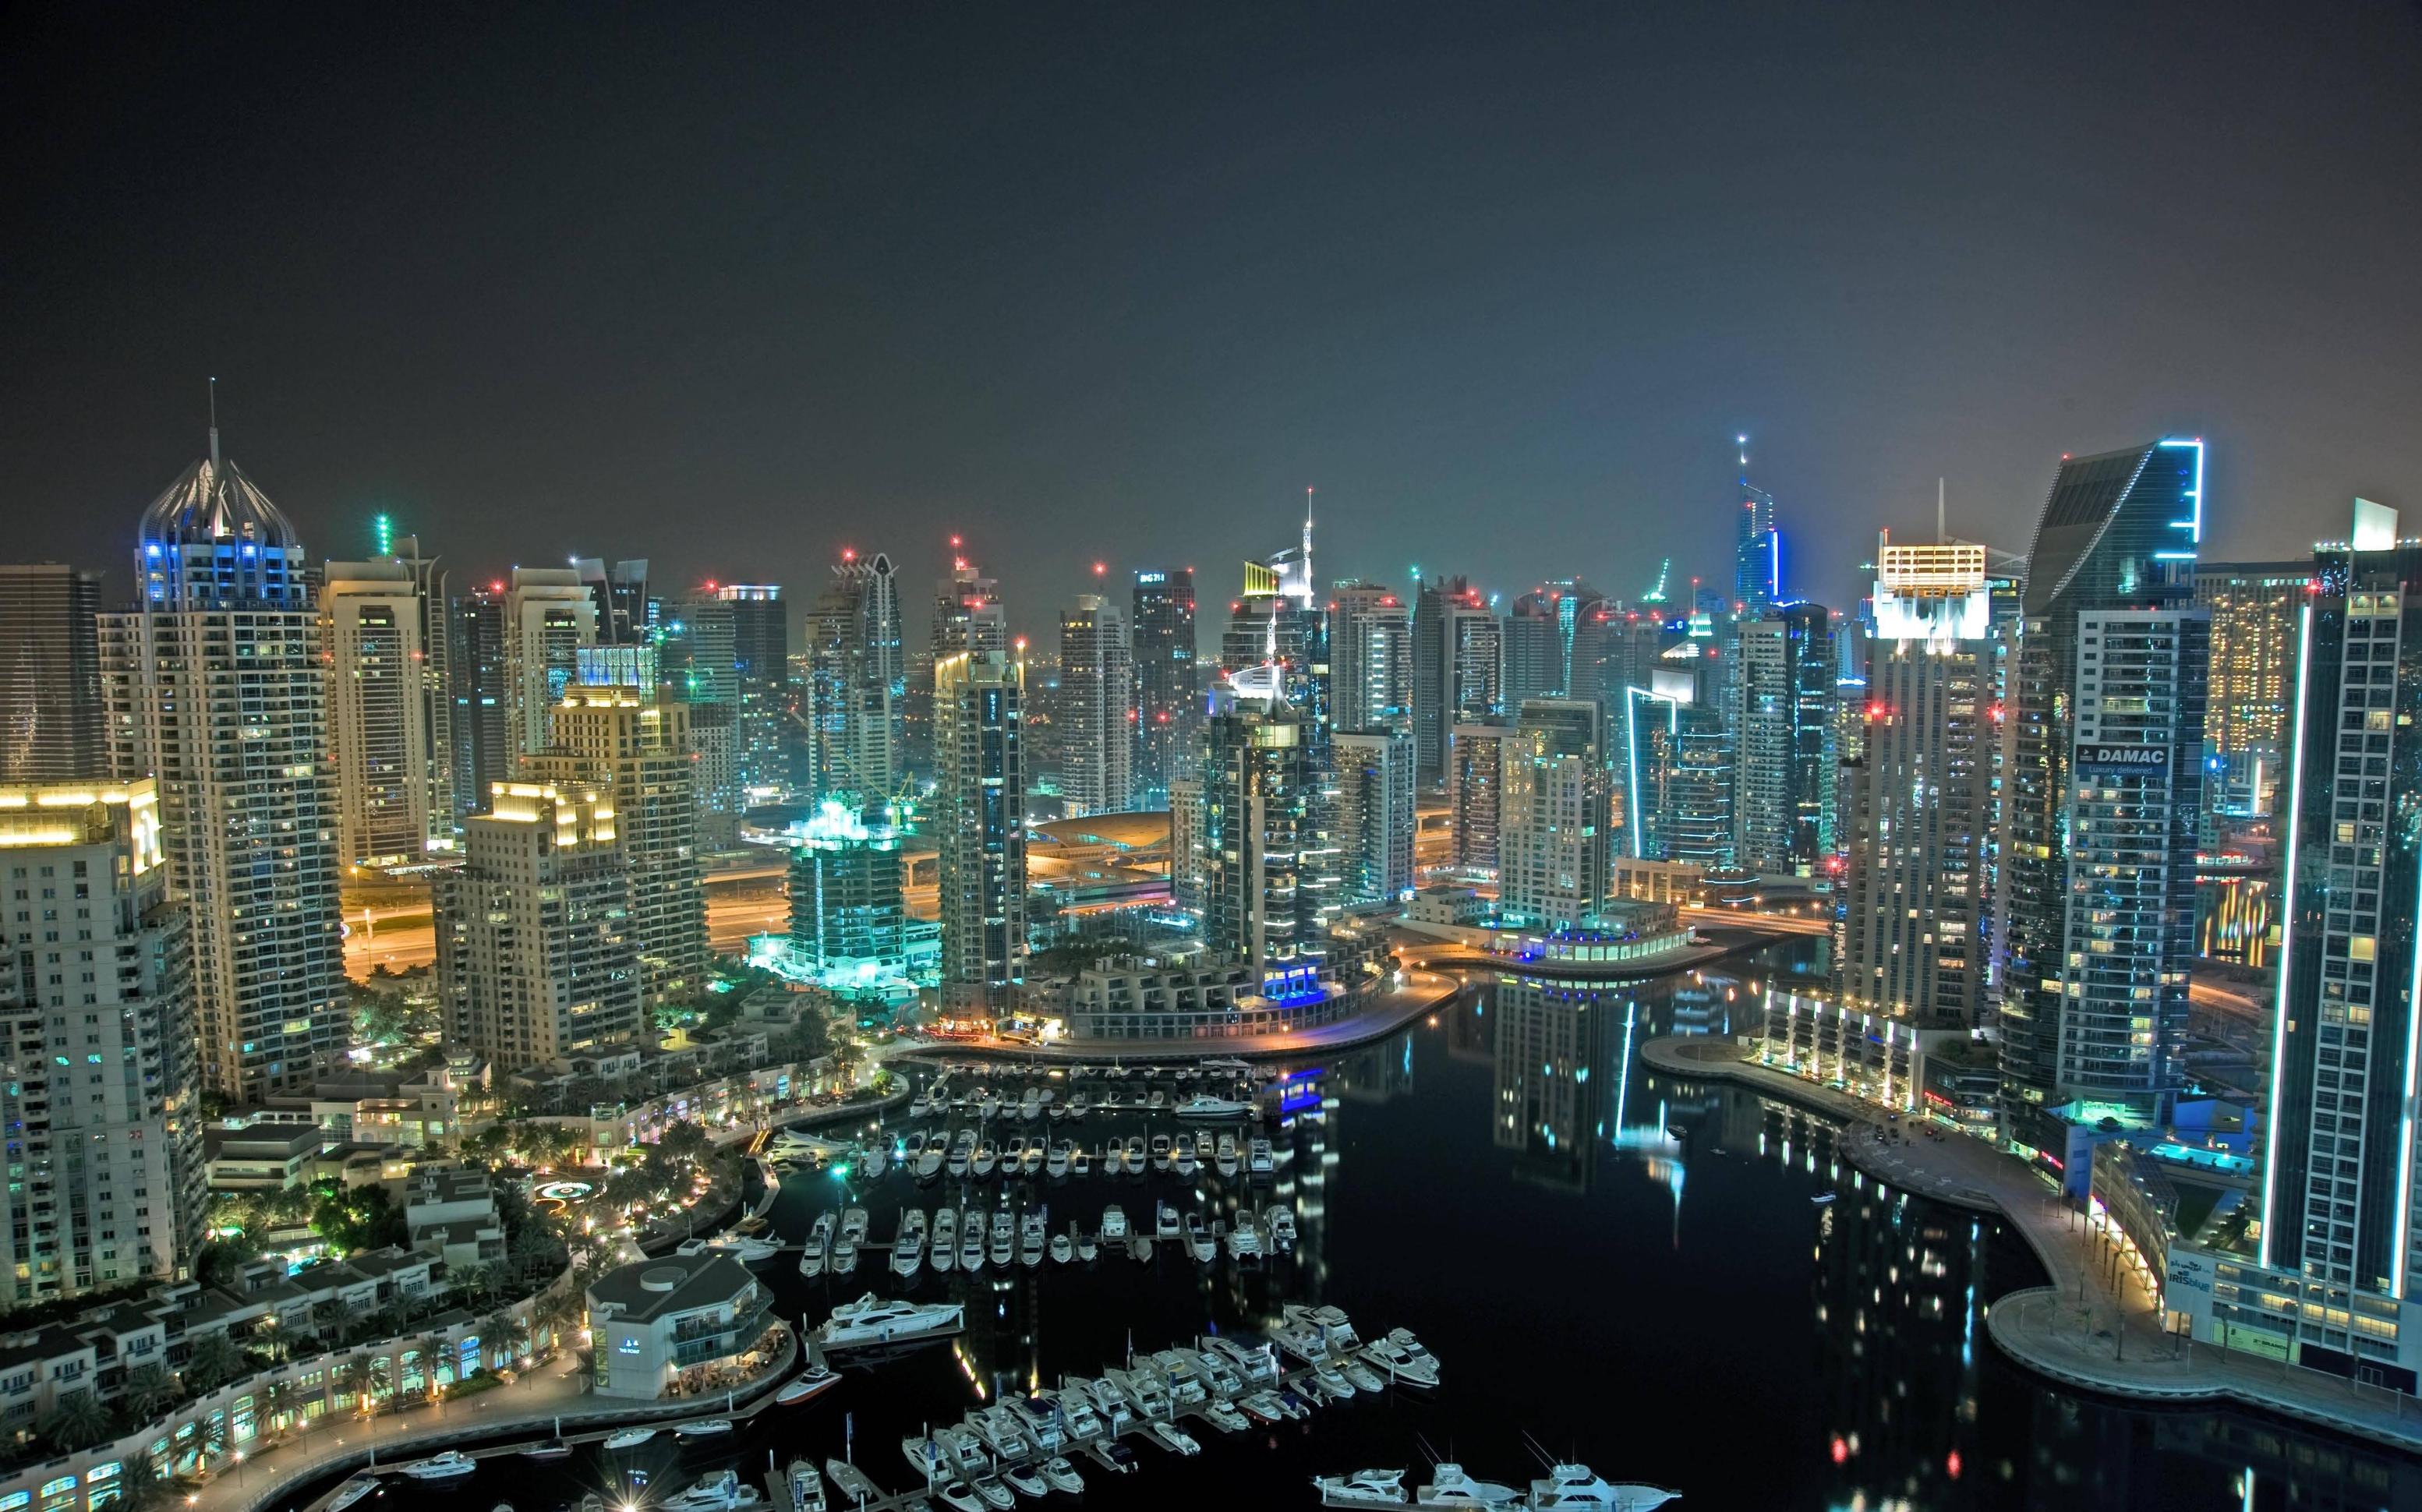 HD Dubai Marina Wallpapers and Photos HD Travelling Backgrounds